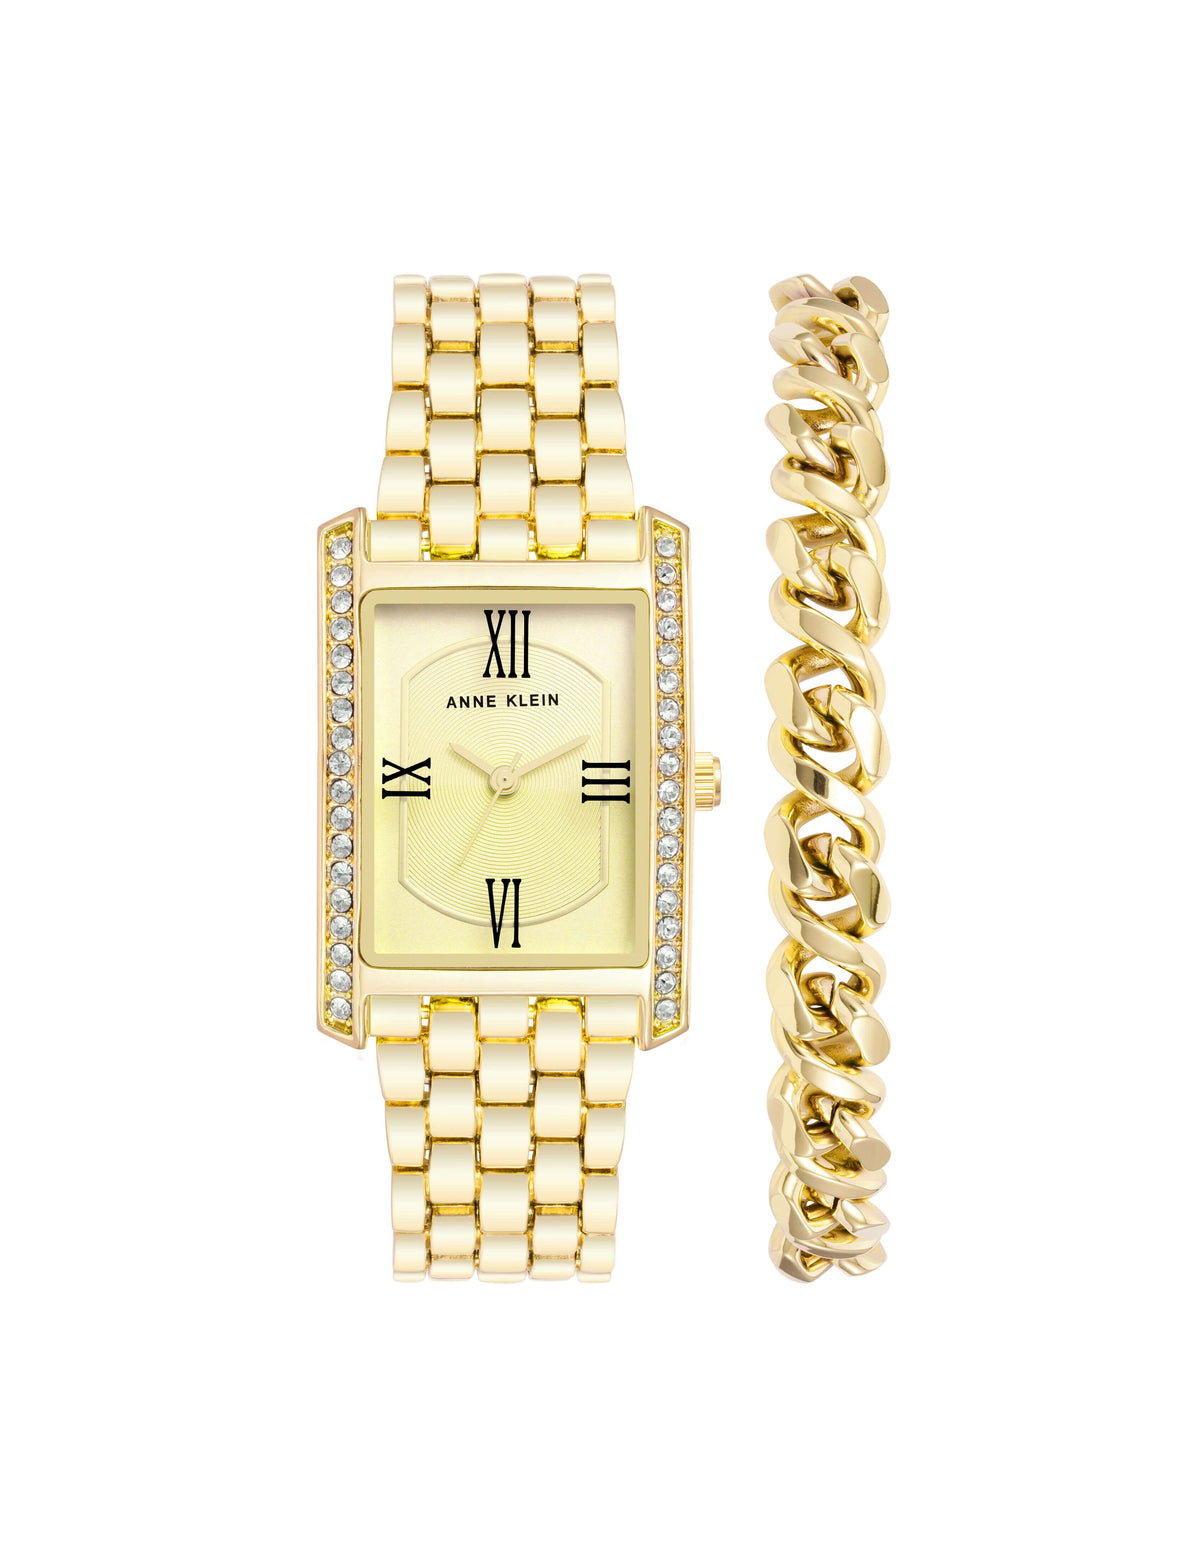 Anne Klein Gold-Tone Rectangular Crystal Accented Watch Set with Chain Bracelet